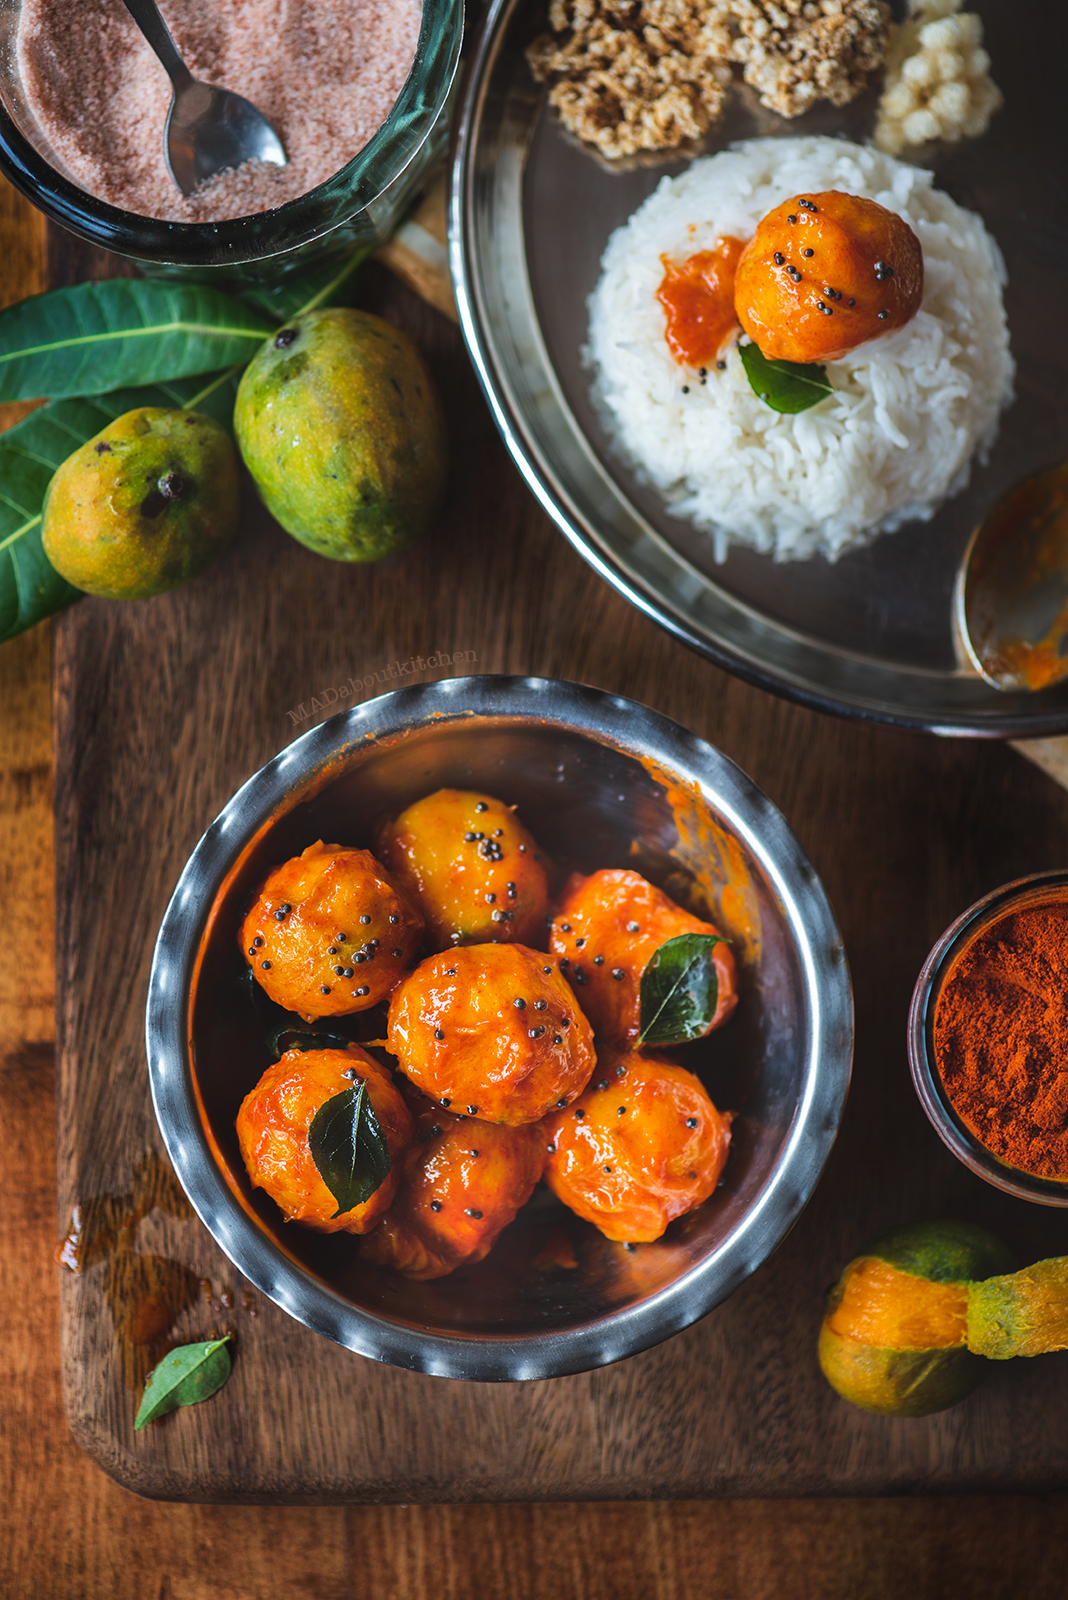 Maavina hannu khara made using small magoes is the a rustic, instant mango curry yet the most yummiest dish that can be had with rice or enjoyed on its own.